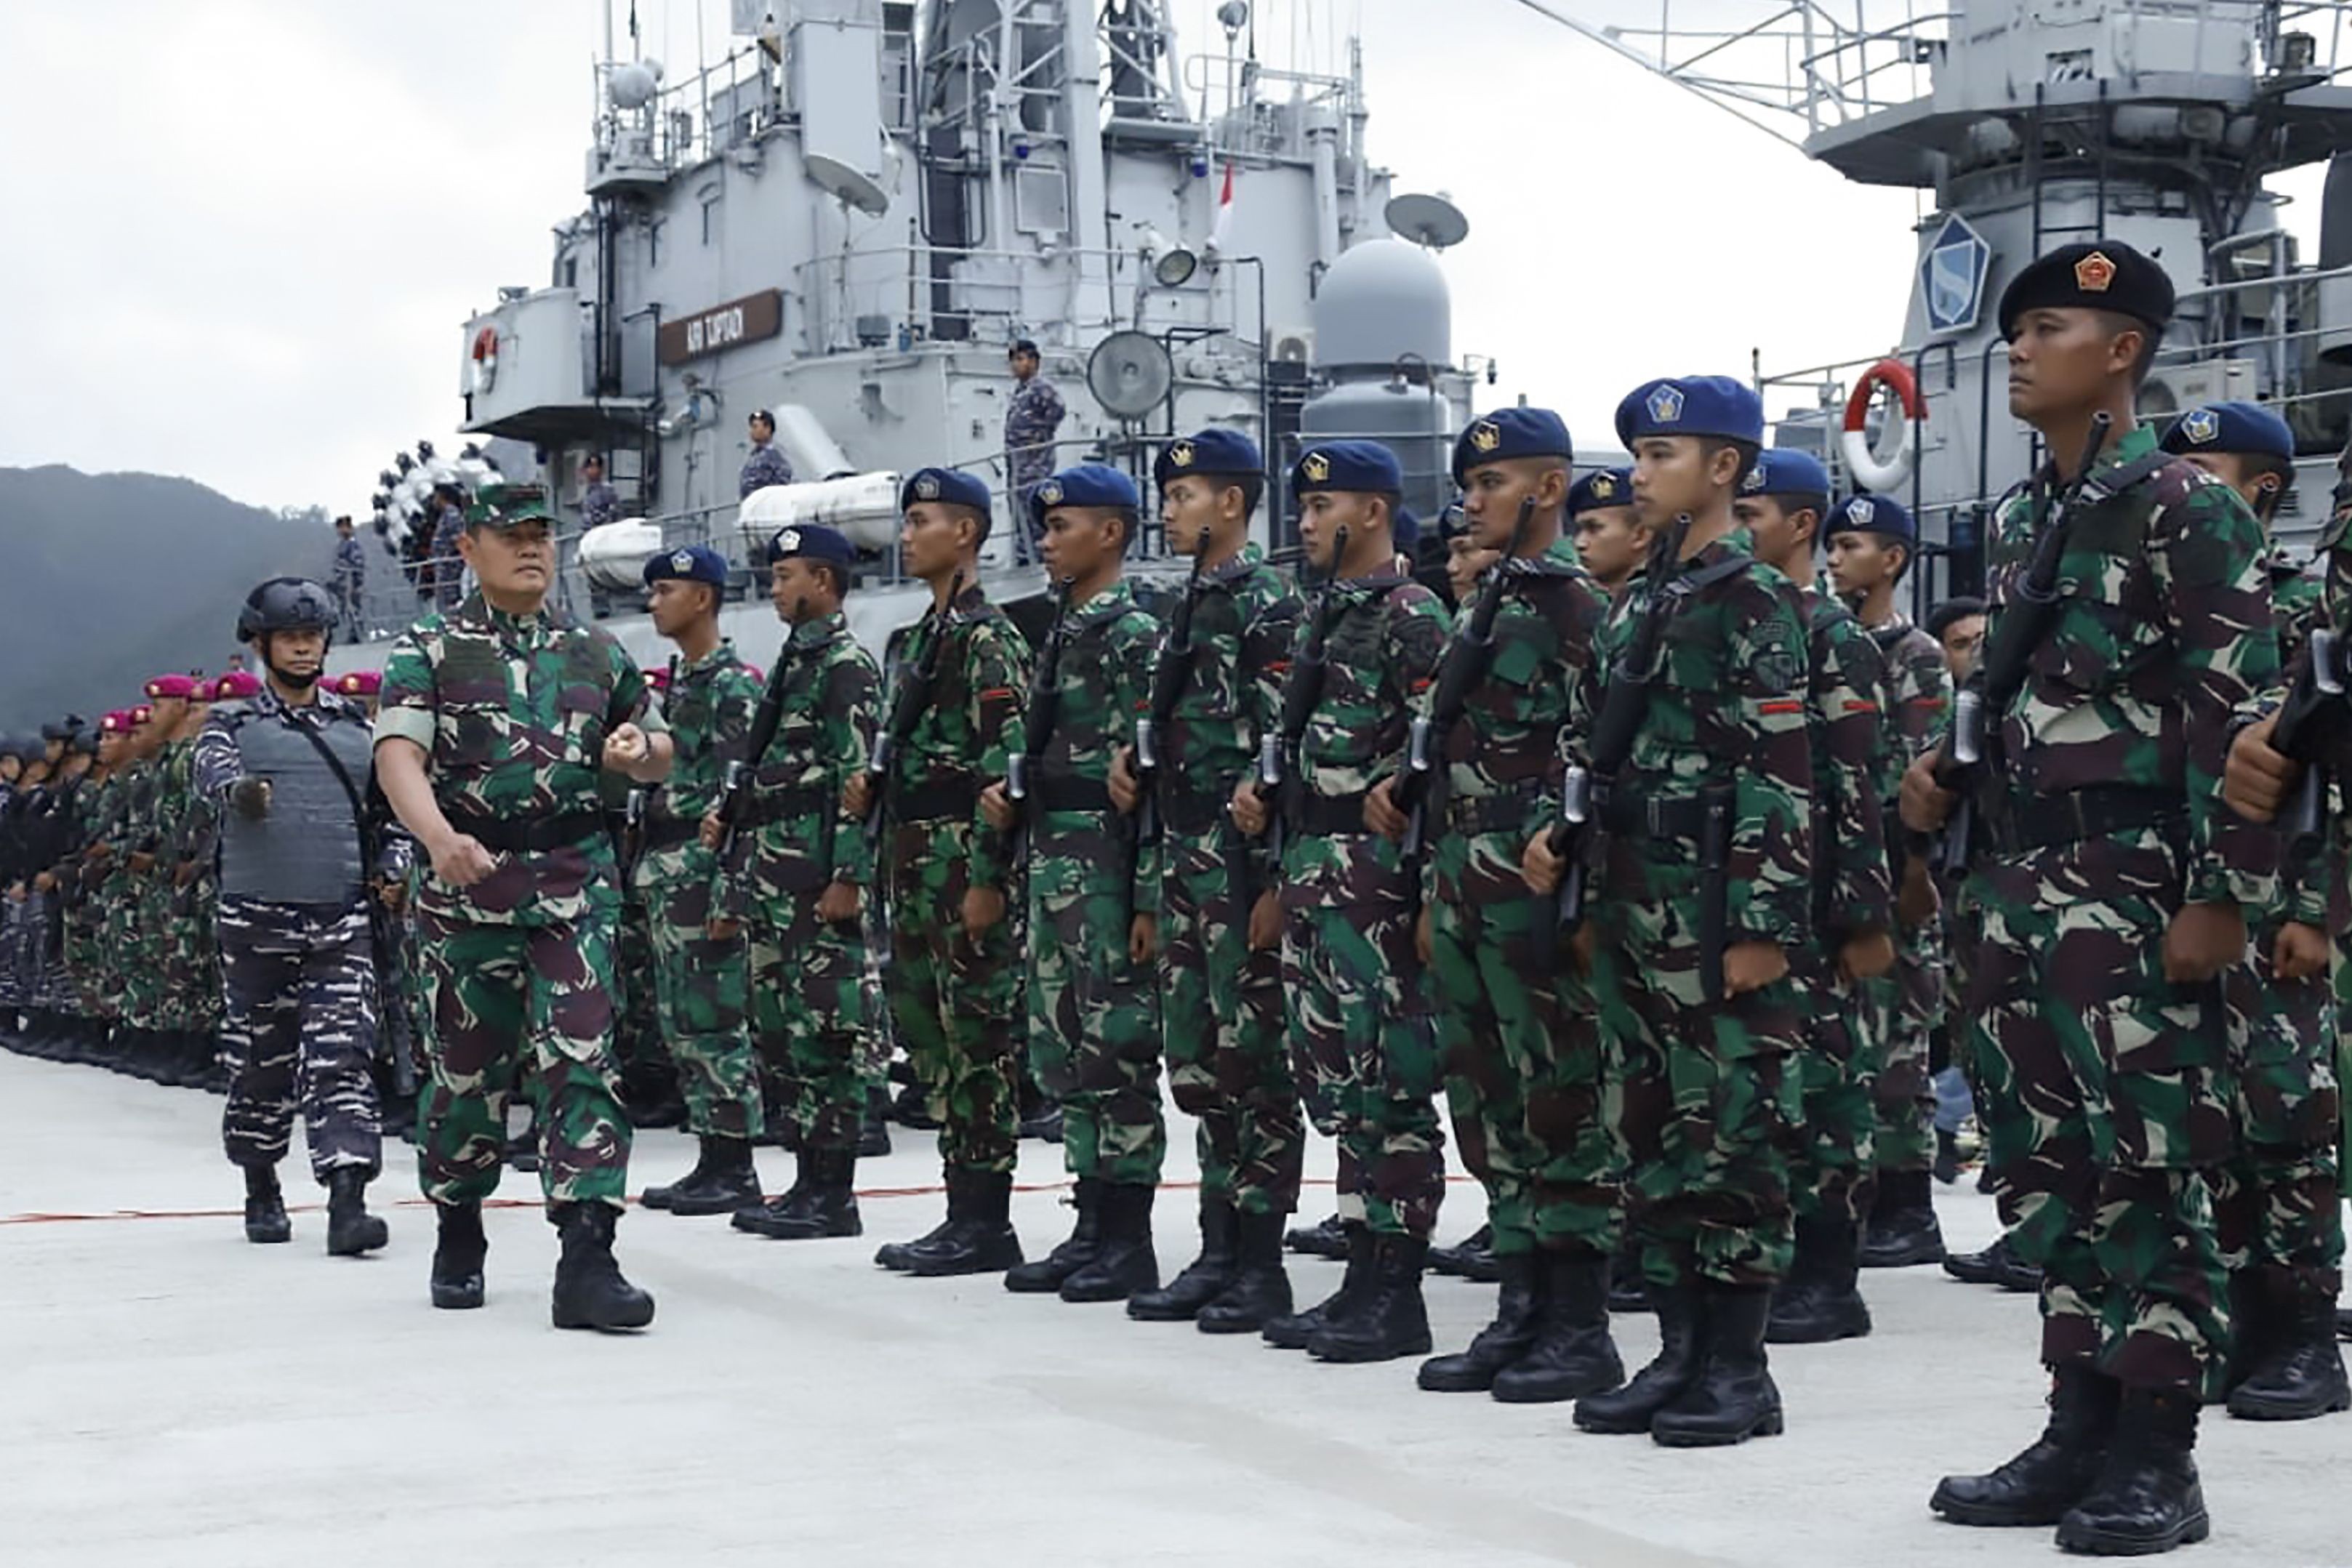 Indonesian troops undergo inspection at Natuna military base in the Riau islands. Photo: Handout